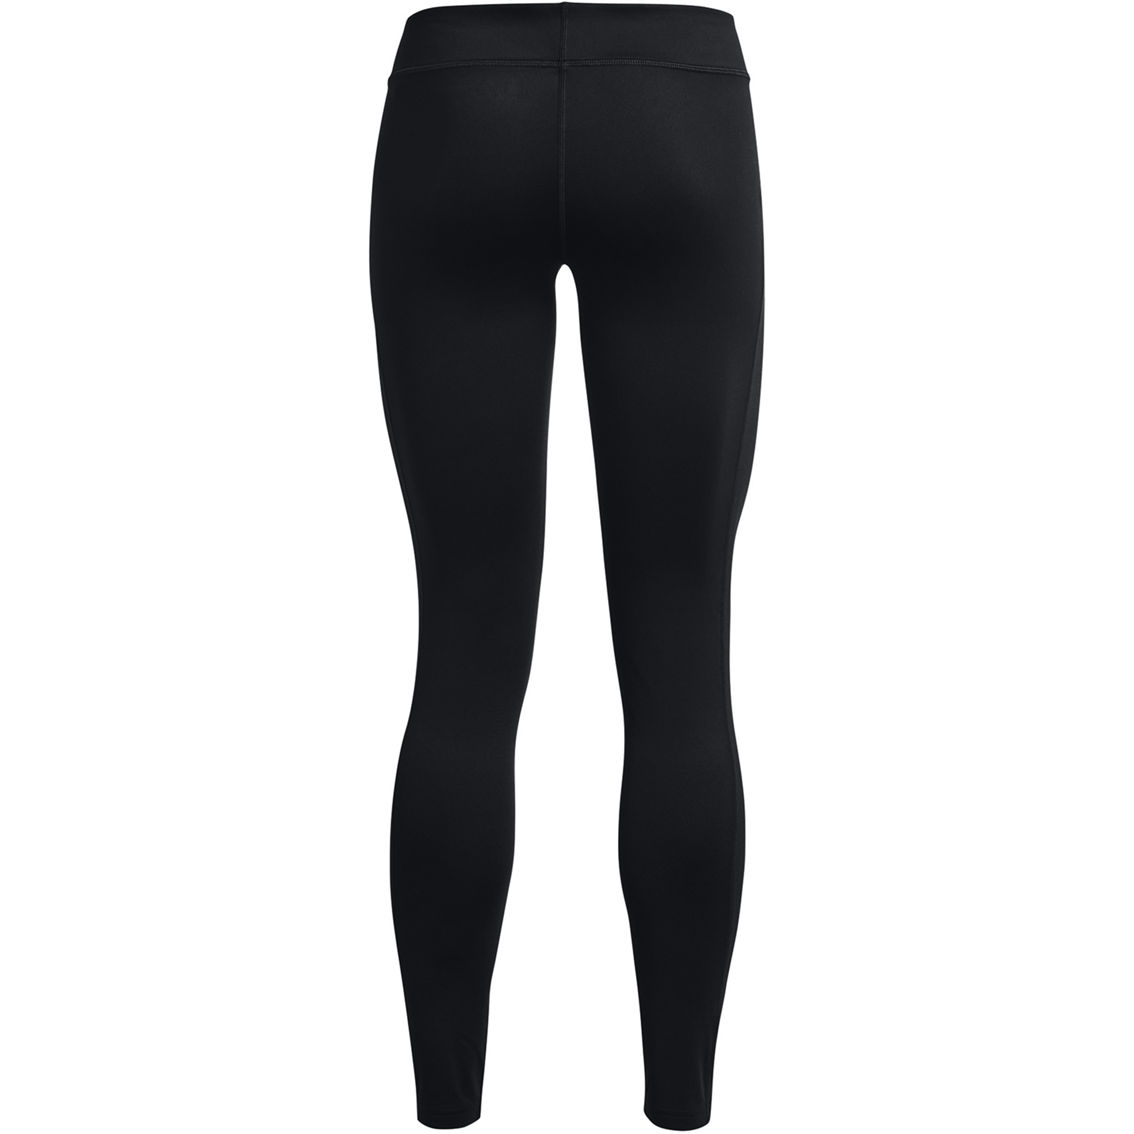 Under Armour Tactical ColdGear Infrared Base Leggings - Image 5 of 7